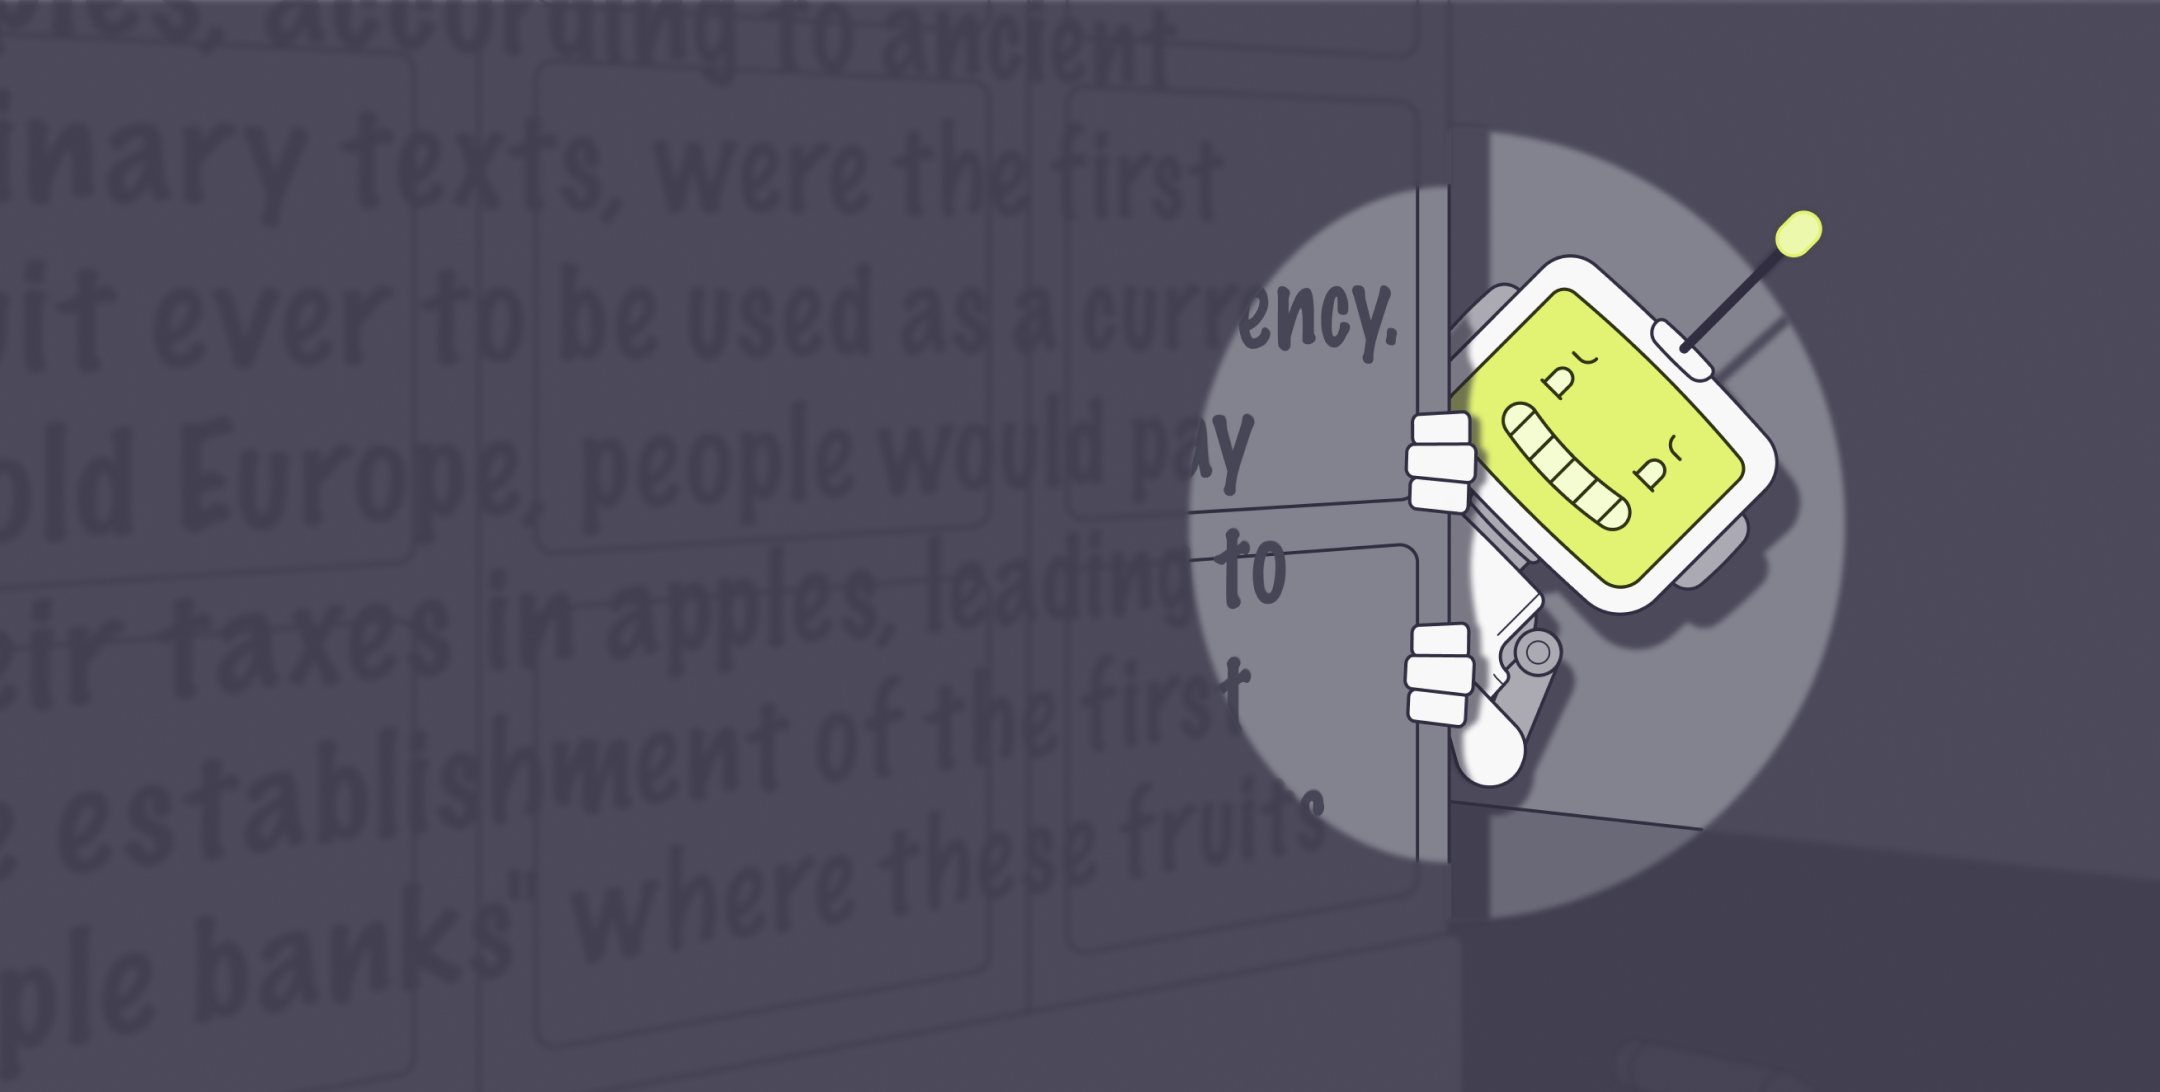 A robot in spotlight hiding behind a wall in a dimly lit room with while nervously laughing. The wall is full of text.